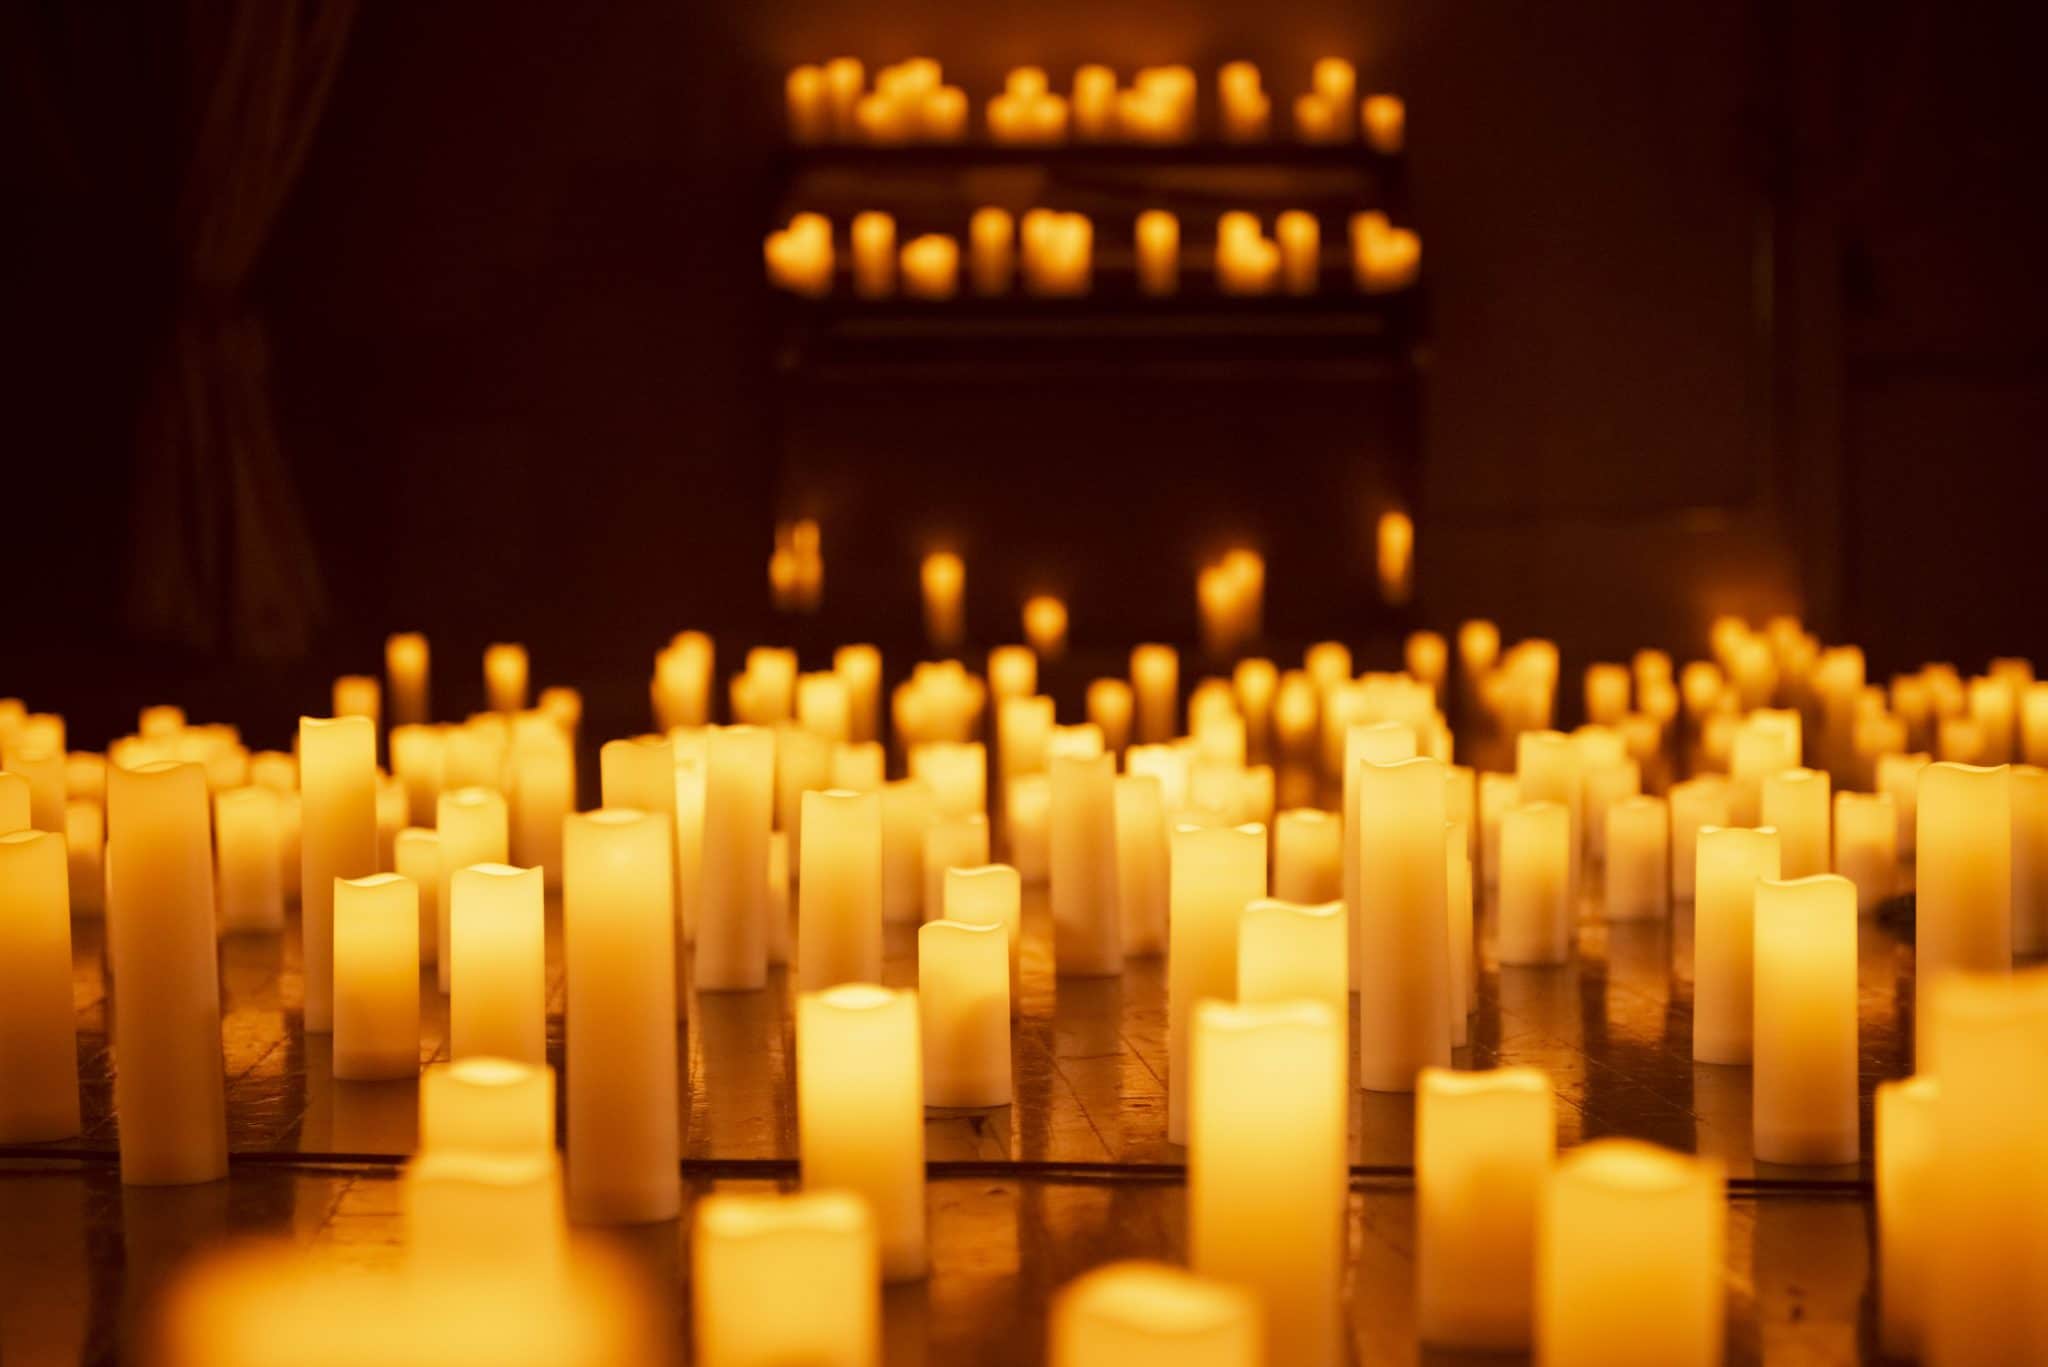 An image taken at Candlelight concerts showing a hundreds of candles. 